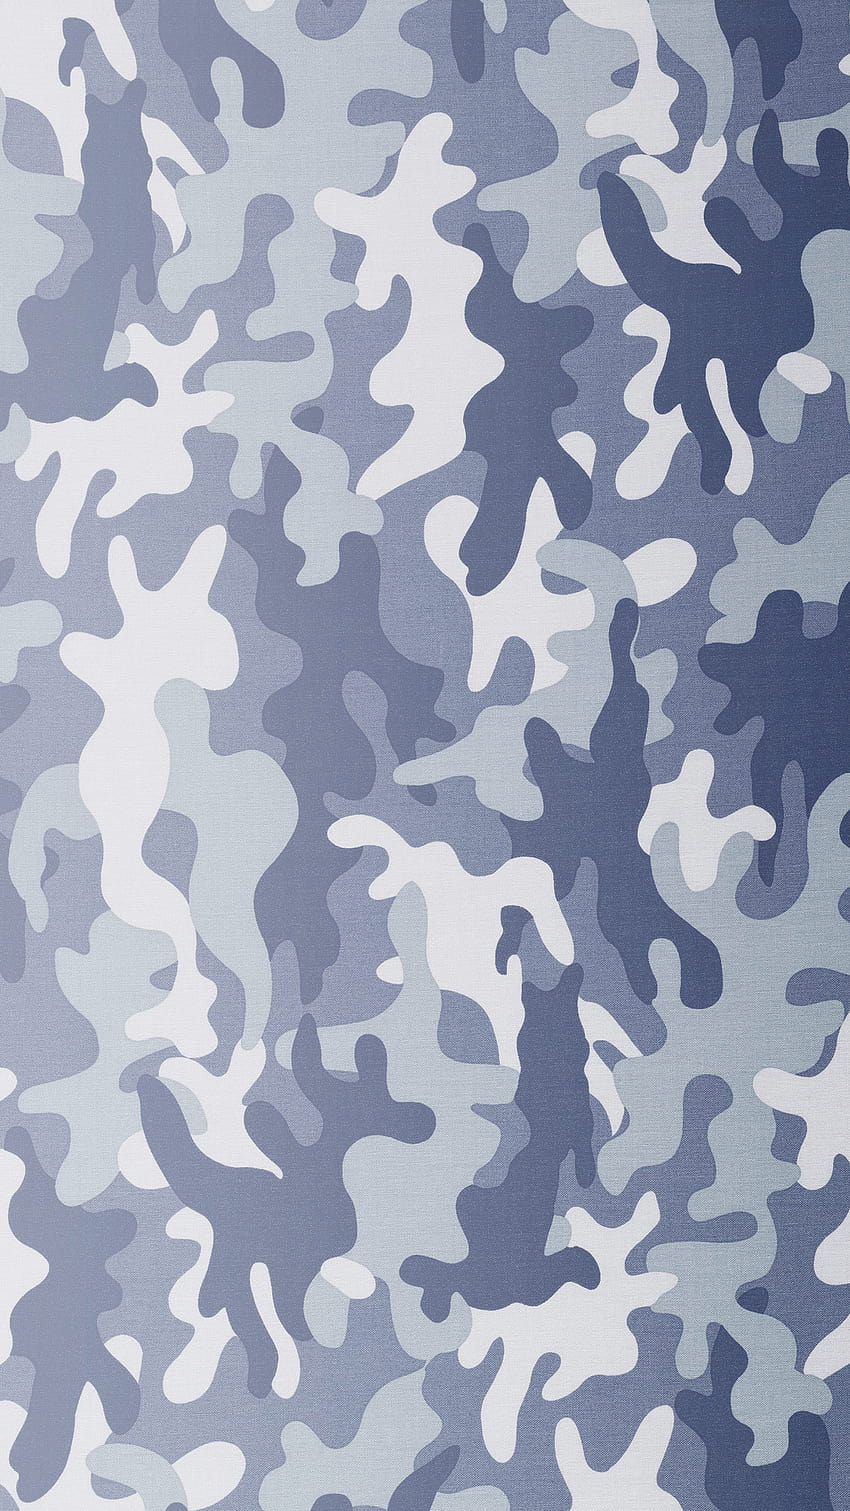 the Android Grey Camouflage HD phone wallpaper